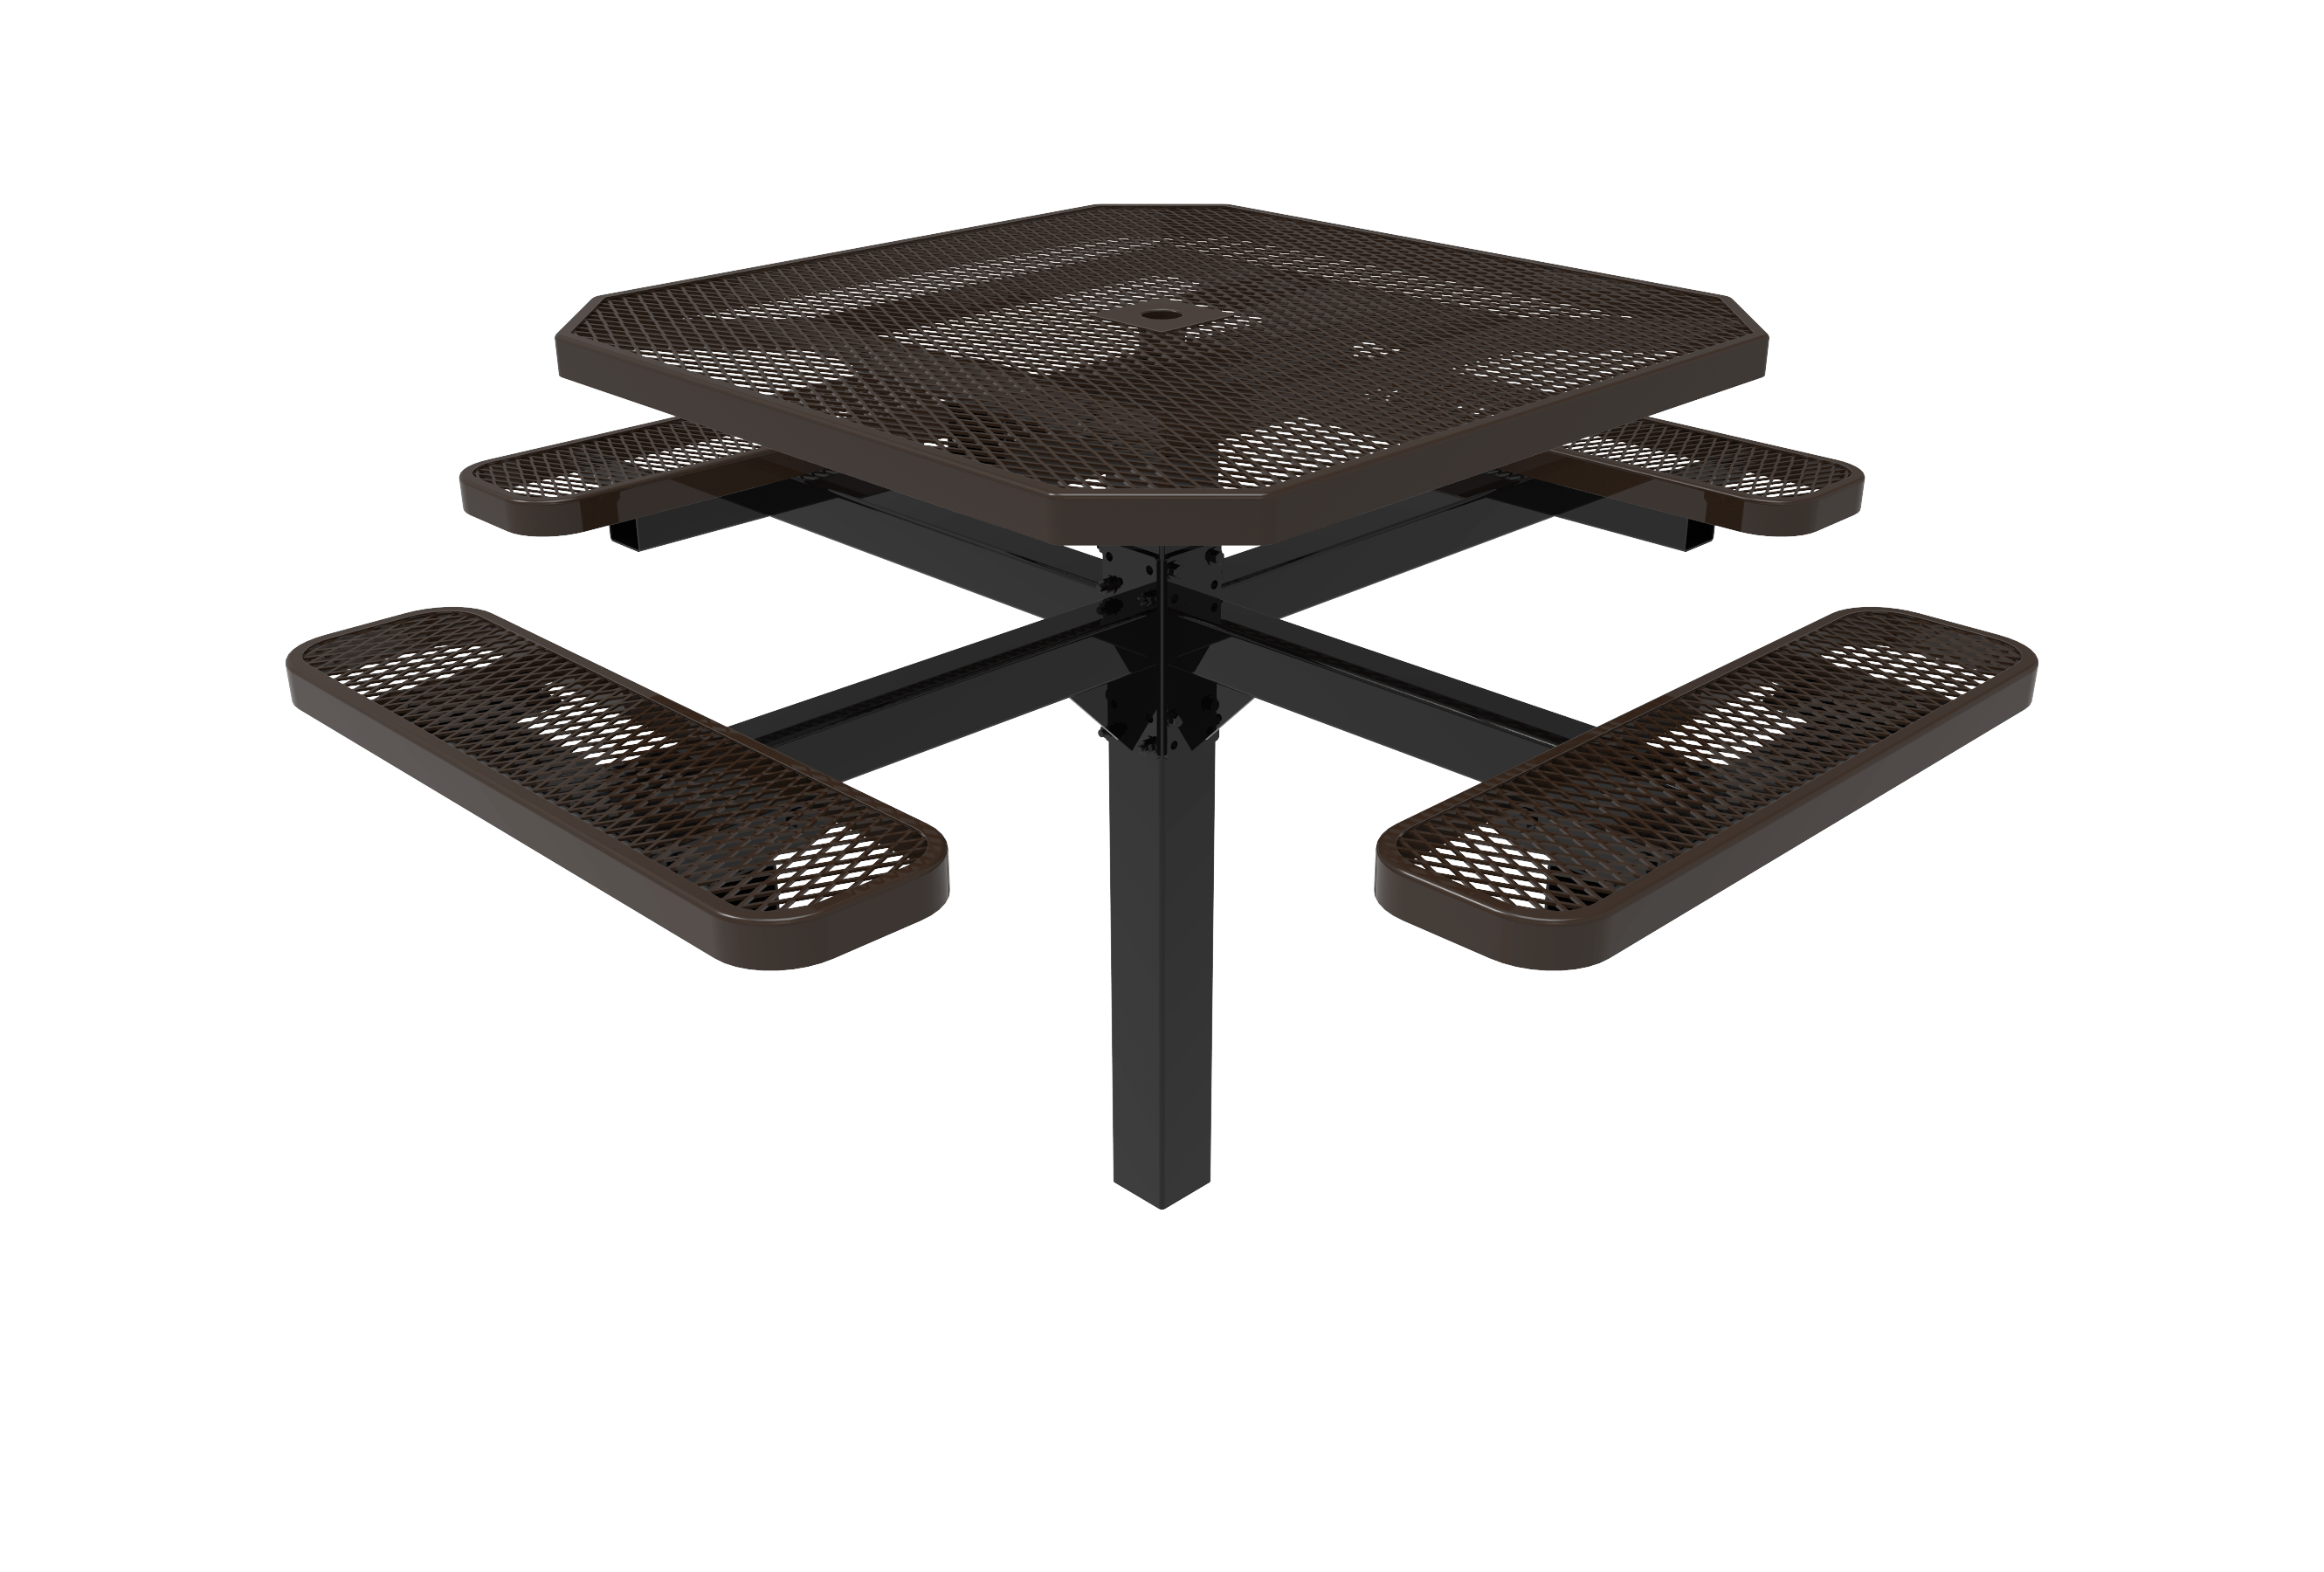 46″ Octagon Top Pedestal In Ground Table 4 Seat-Mesh
TOT46-C-12-000
Industry Standard Finish
$1309.00
TOT46-A-12-000
Advantage Premium Finish
$1589.00
